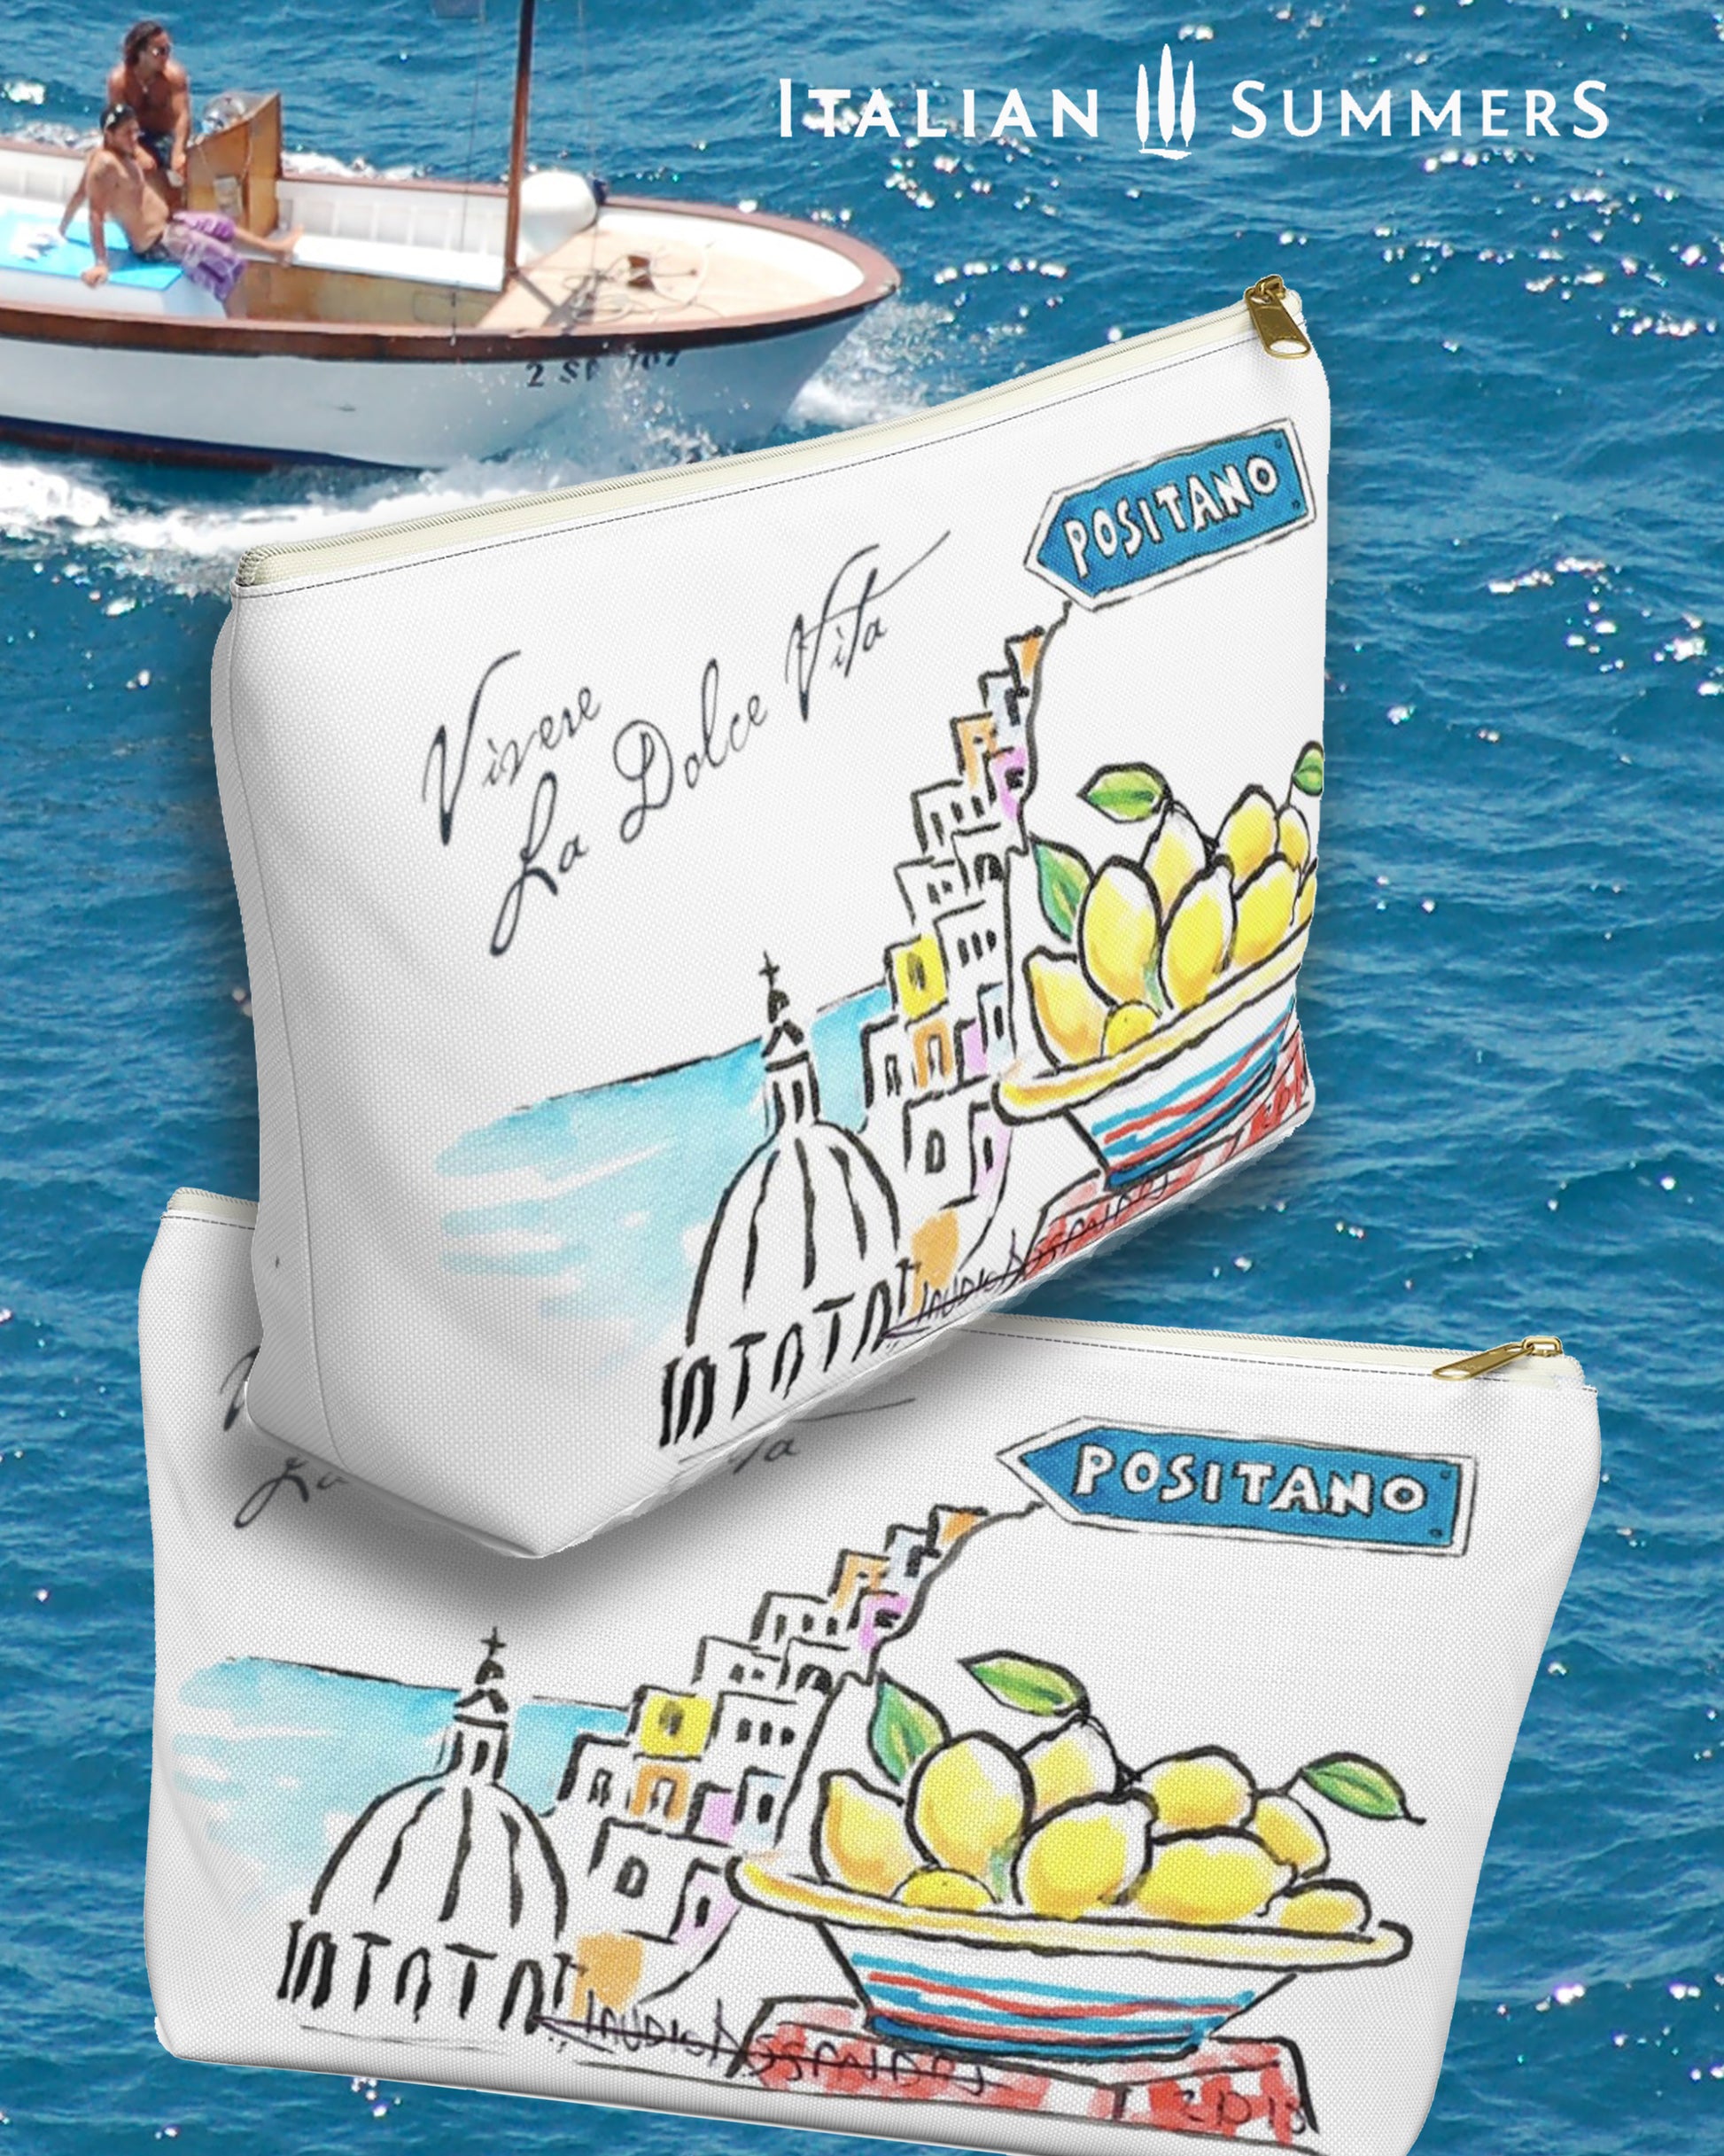 Italy inspired clutch of white canvas with the text Vivere La Dolce Vita which means Living La Dolce Vita. The clutch is decorated with a sketch of a part of Positano, the cupola of the church and some ice cream colored houses seen from the side and a big ceramic bowl of Amalfi Coast lemons, there is also a streetsign which sais Positano. Designed by Italian Summers